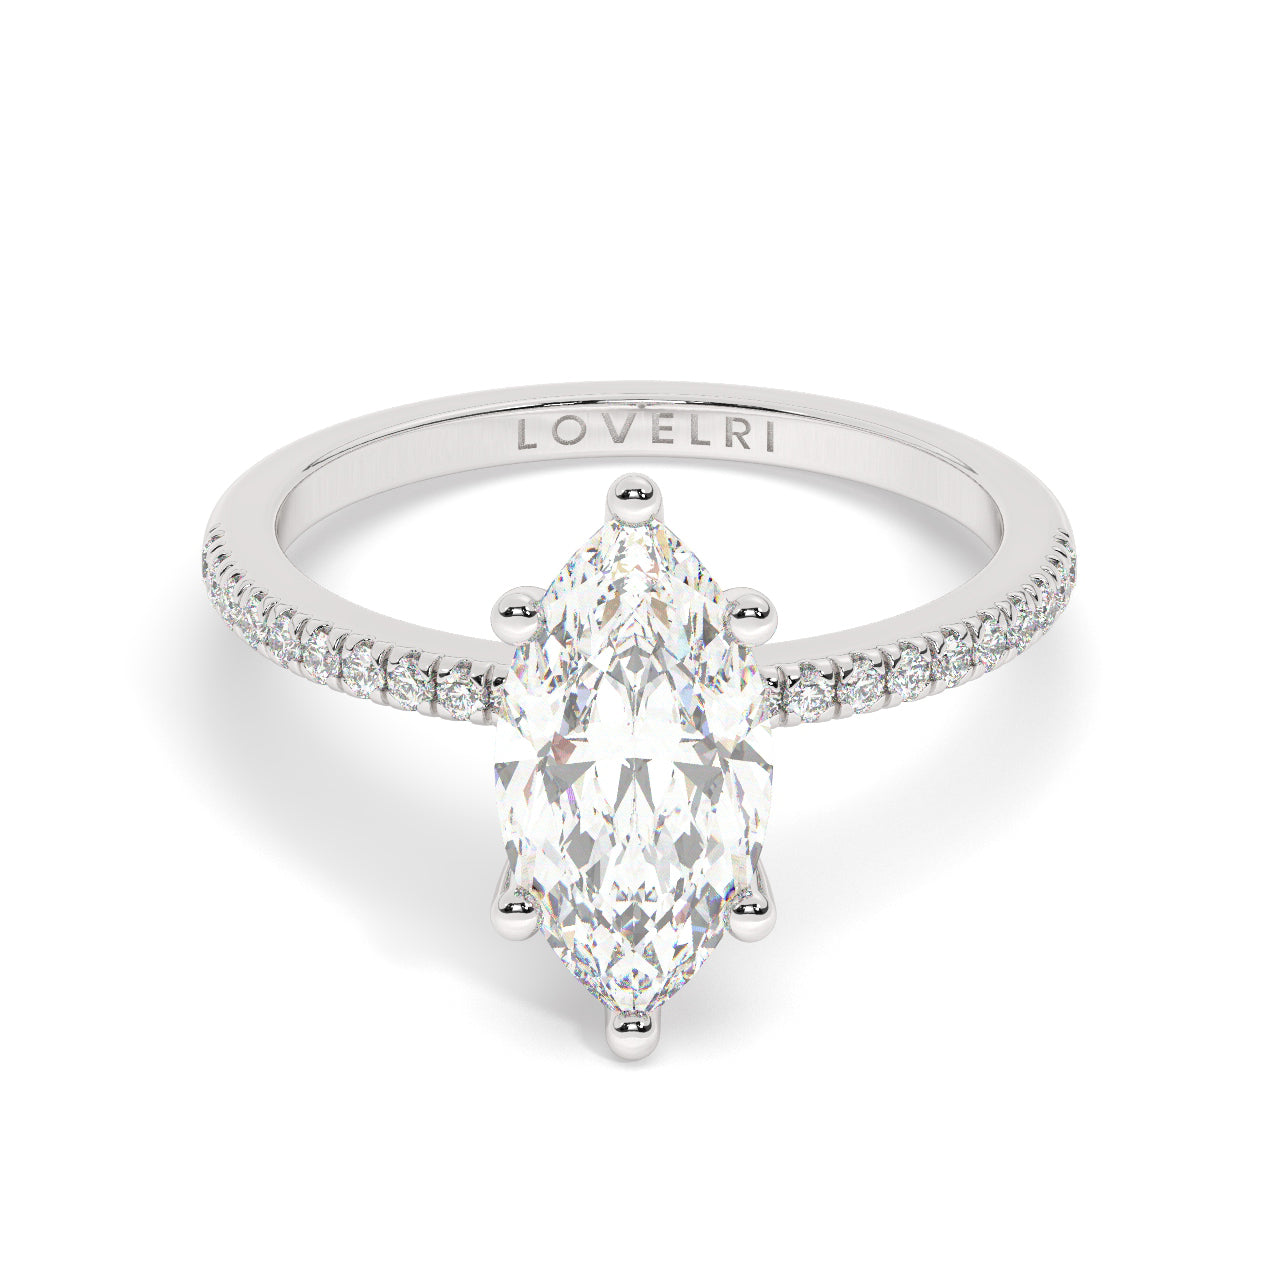 Marquise Cut Diamond Ring set on a Pavé Band in White Gold